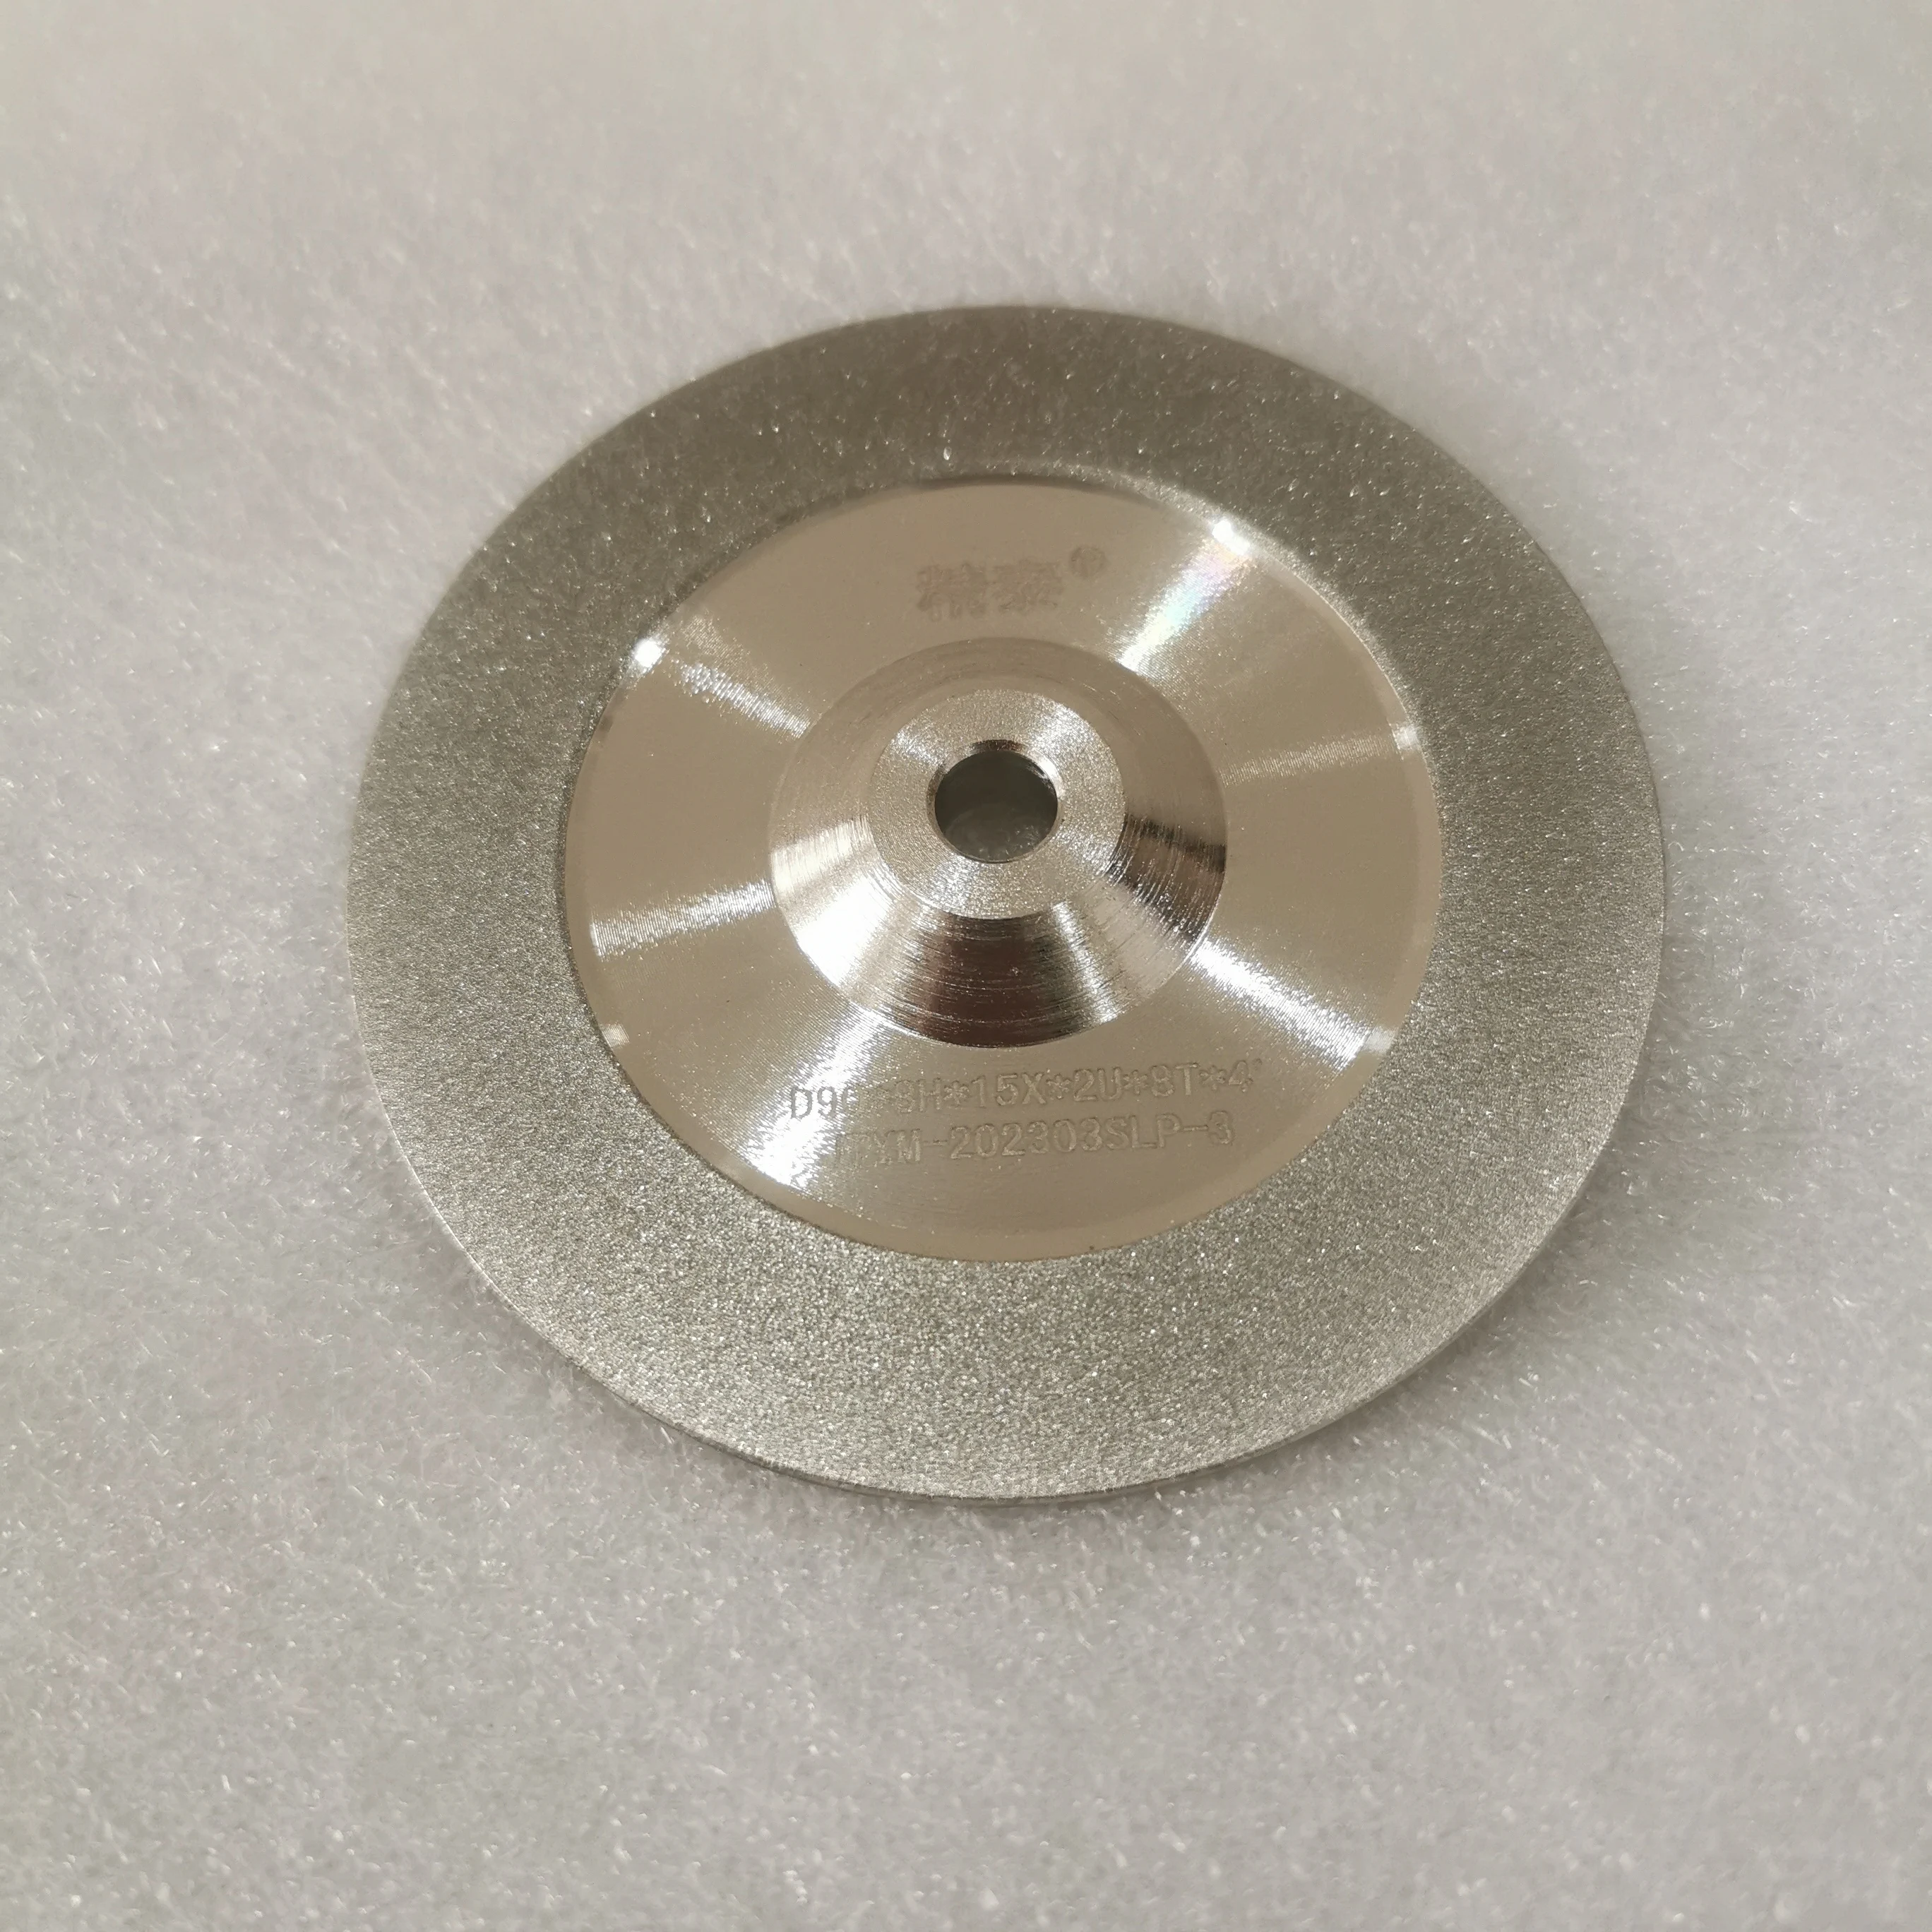 Grinding wheel for TIG Welder Tungsten Electrode Sharpener Grinder tungsten electrode grinder sharpener for tig improvement 1 8 3 8 1 4 inch 22 5°and 30°